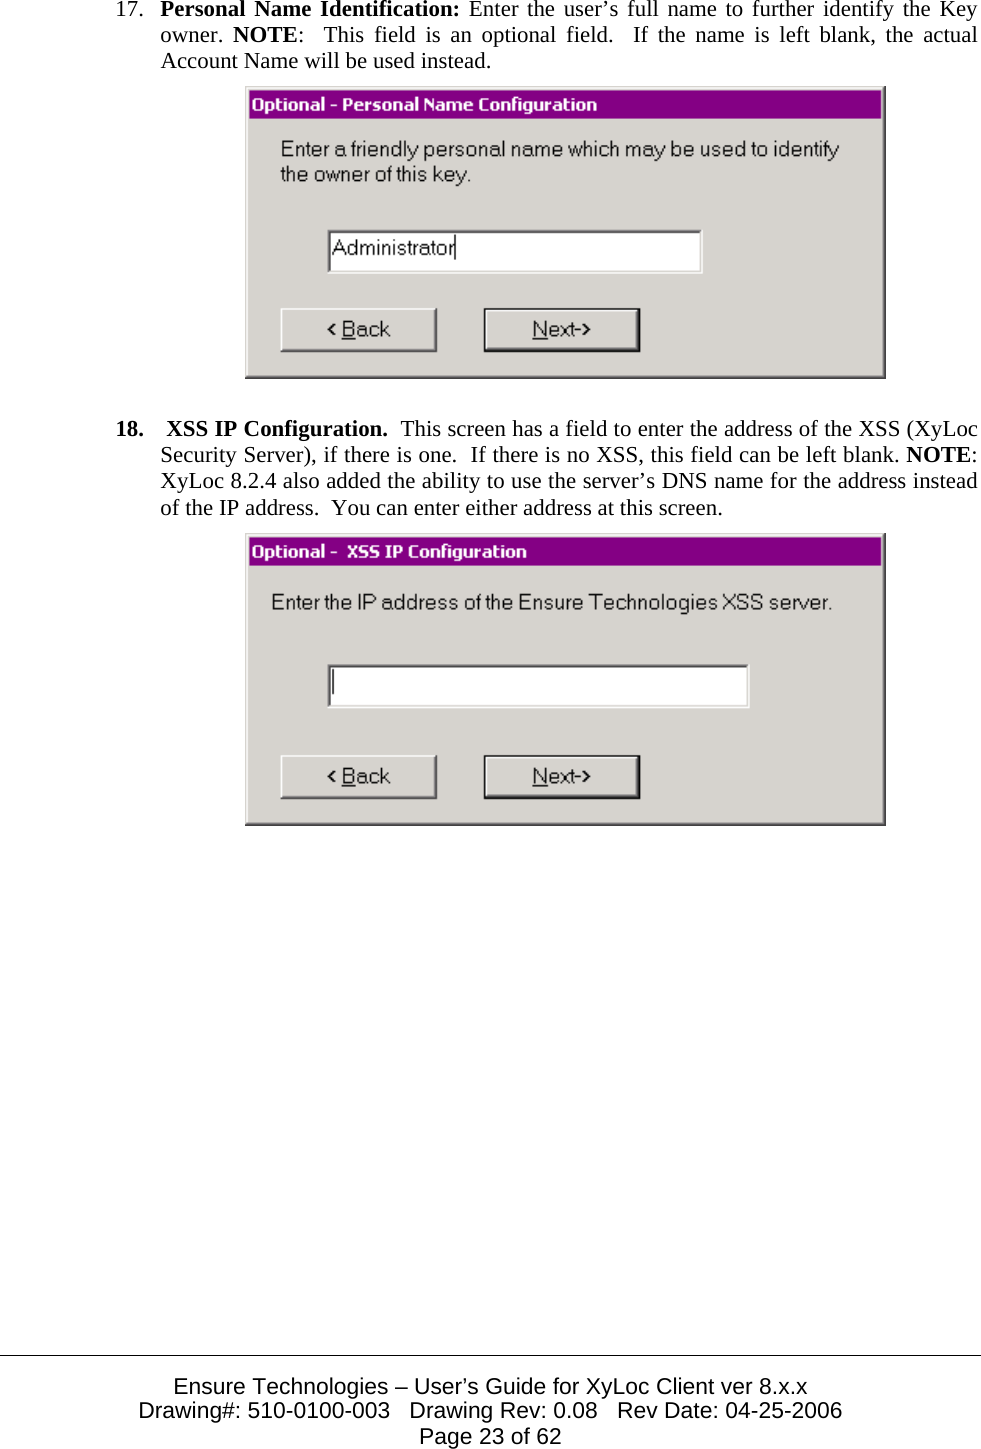  Ensure Technologies – User’s Guide for XyLoc Client ver 8.x.x Drawing#: 510-0100-003   Drawing Rev: 0.08   Rev Date: 04-25-2006 Page 23 of 62 17. Personal Name Identification: Enter the user’s full name to further identify the Key owner.  NOTE:  This field is an optional field.  If the name is left blank, the actual Account Name will be used instead.   18.  XSS IP Configuration.  This screen has a field to enter the address of the XSS (XyLoc Security Server), if there is one.  If there is no XSS, this field can be left blank. NOTE:  XyLoc 8.2.4 also added the ability to use the server’s DNS name for the address instead of the IP address.  You can enter either address at this screen.   